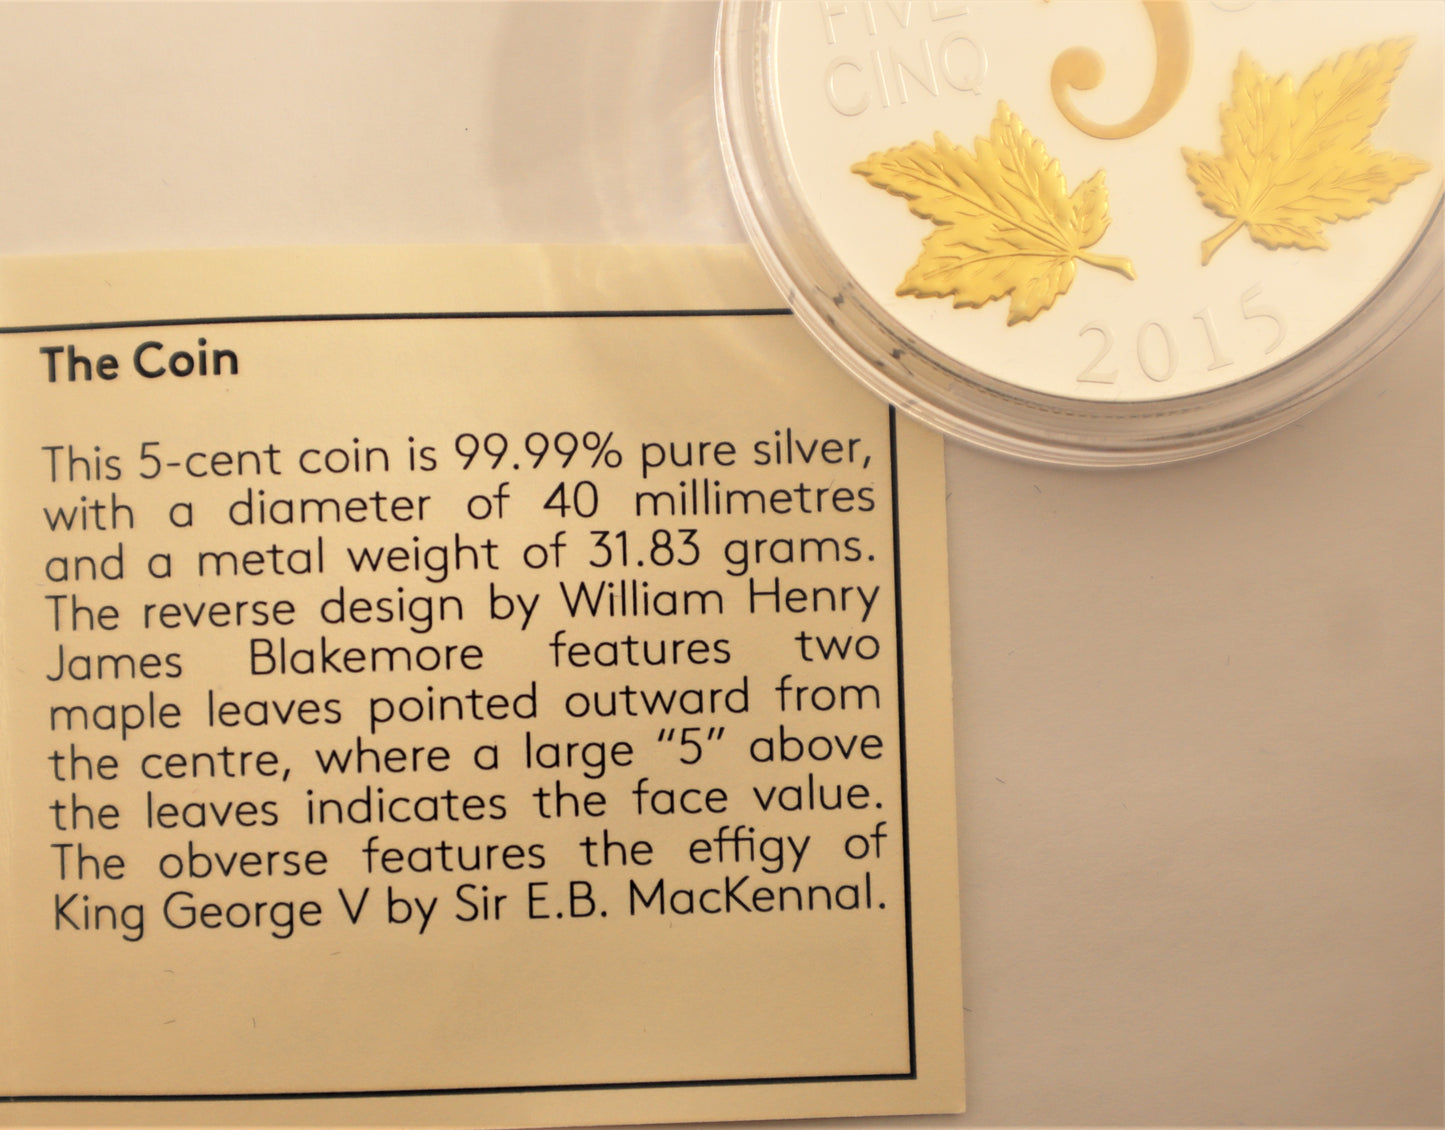 2015 5-Cent Fine Silver Coin - Legacy of the Canadian Nickel - Two Maple Leaves